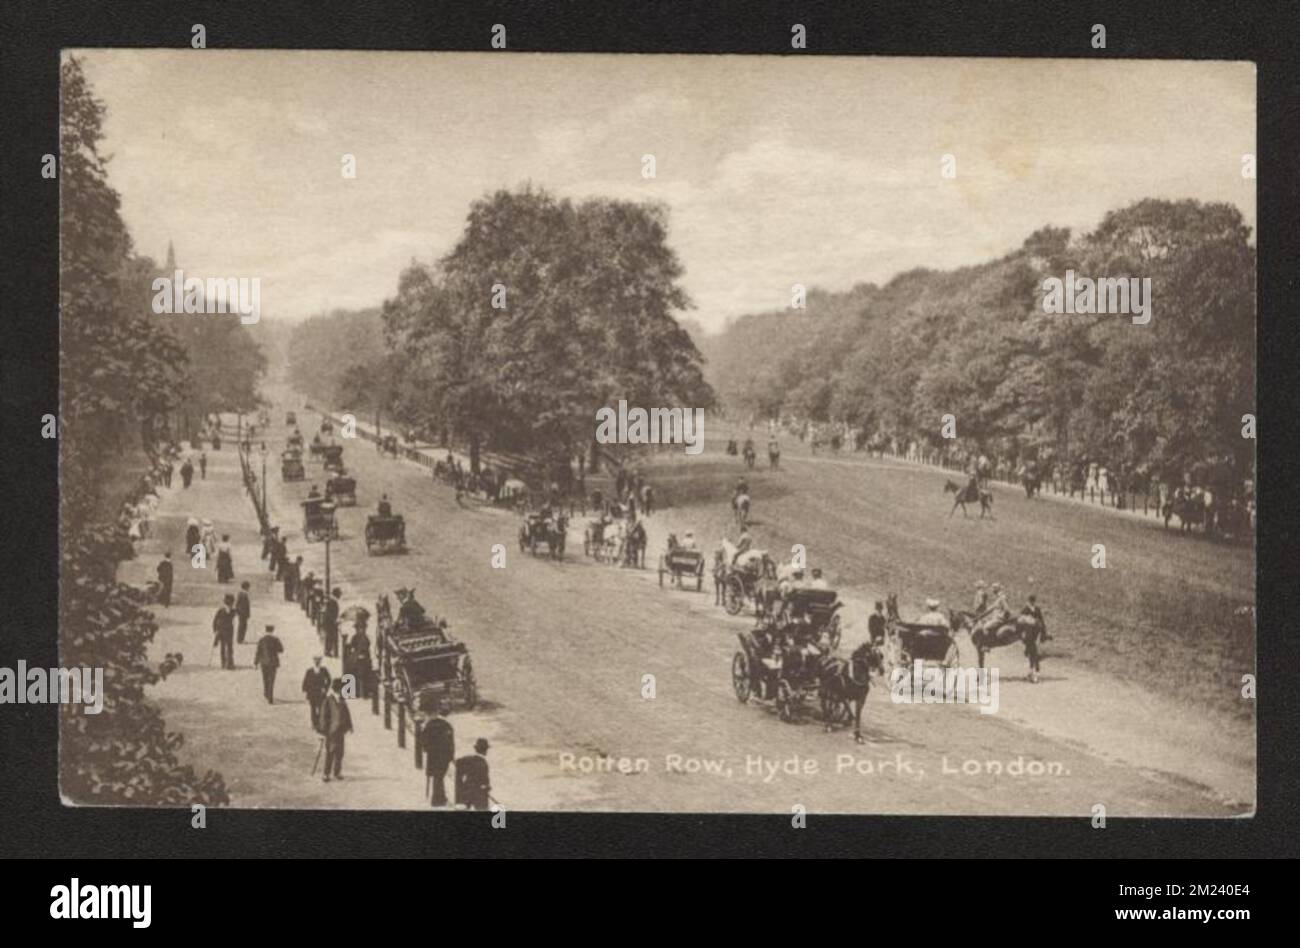 Rotten Row Hyde Park Corner London real Photograph postcard circa late 19th century showing carriages and pedestrians on Promenade. Stock Photo